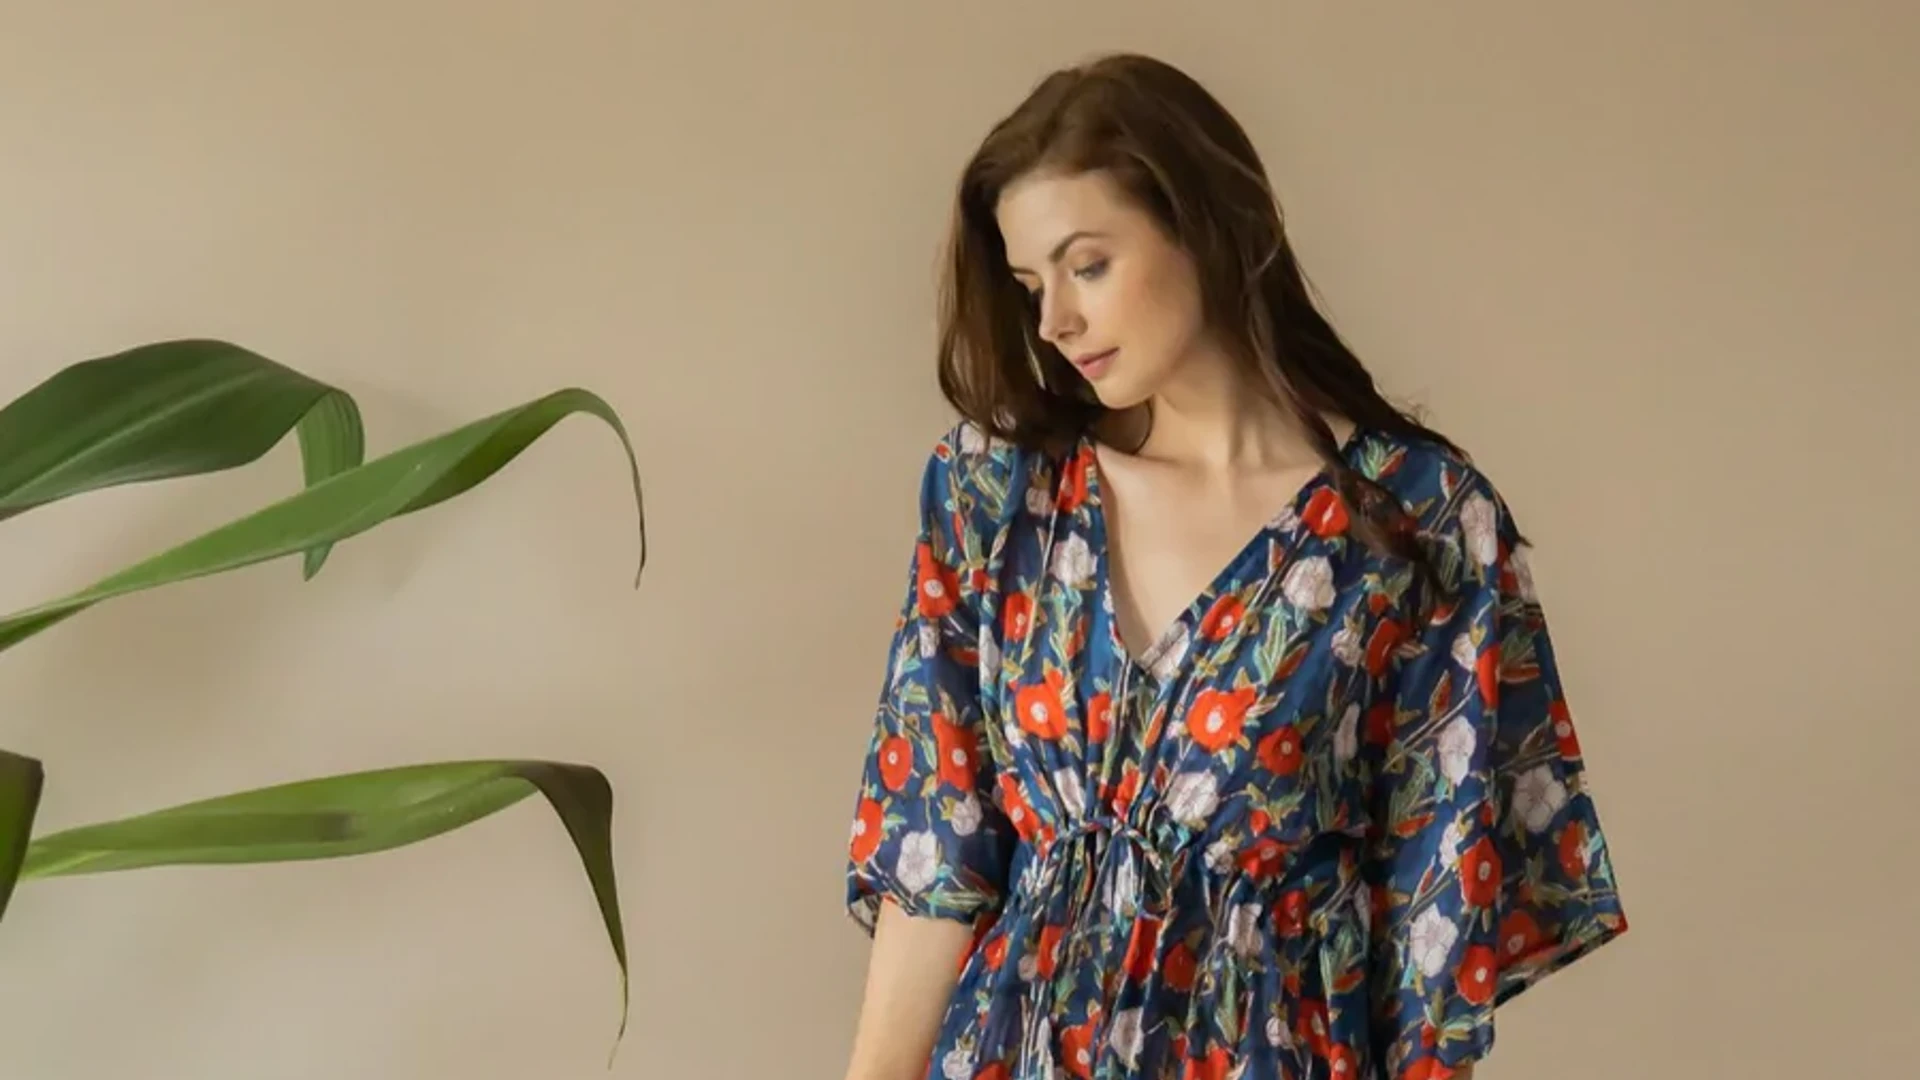 Get the Look of A Bougainville With This Slow Fashion Brand’s Effortless & Stylish Outfits